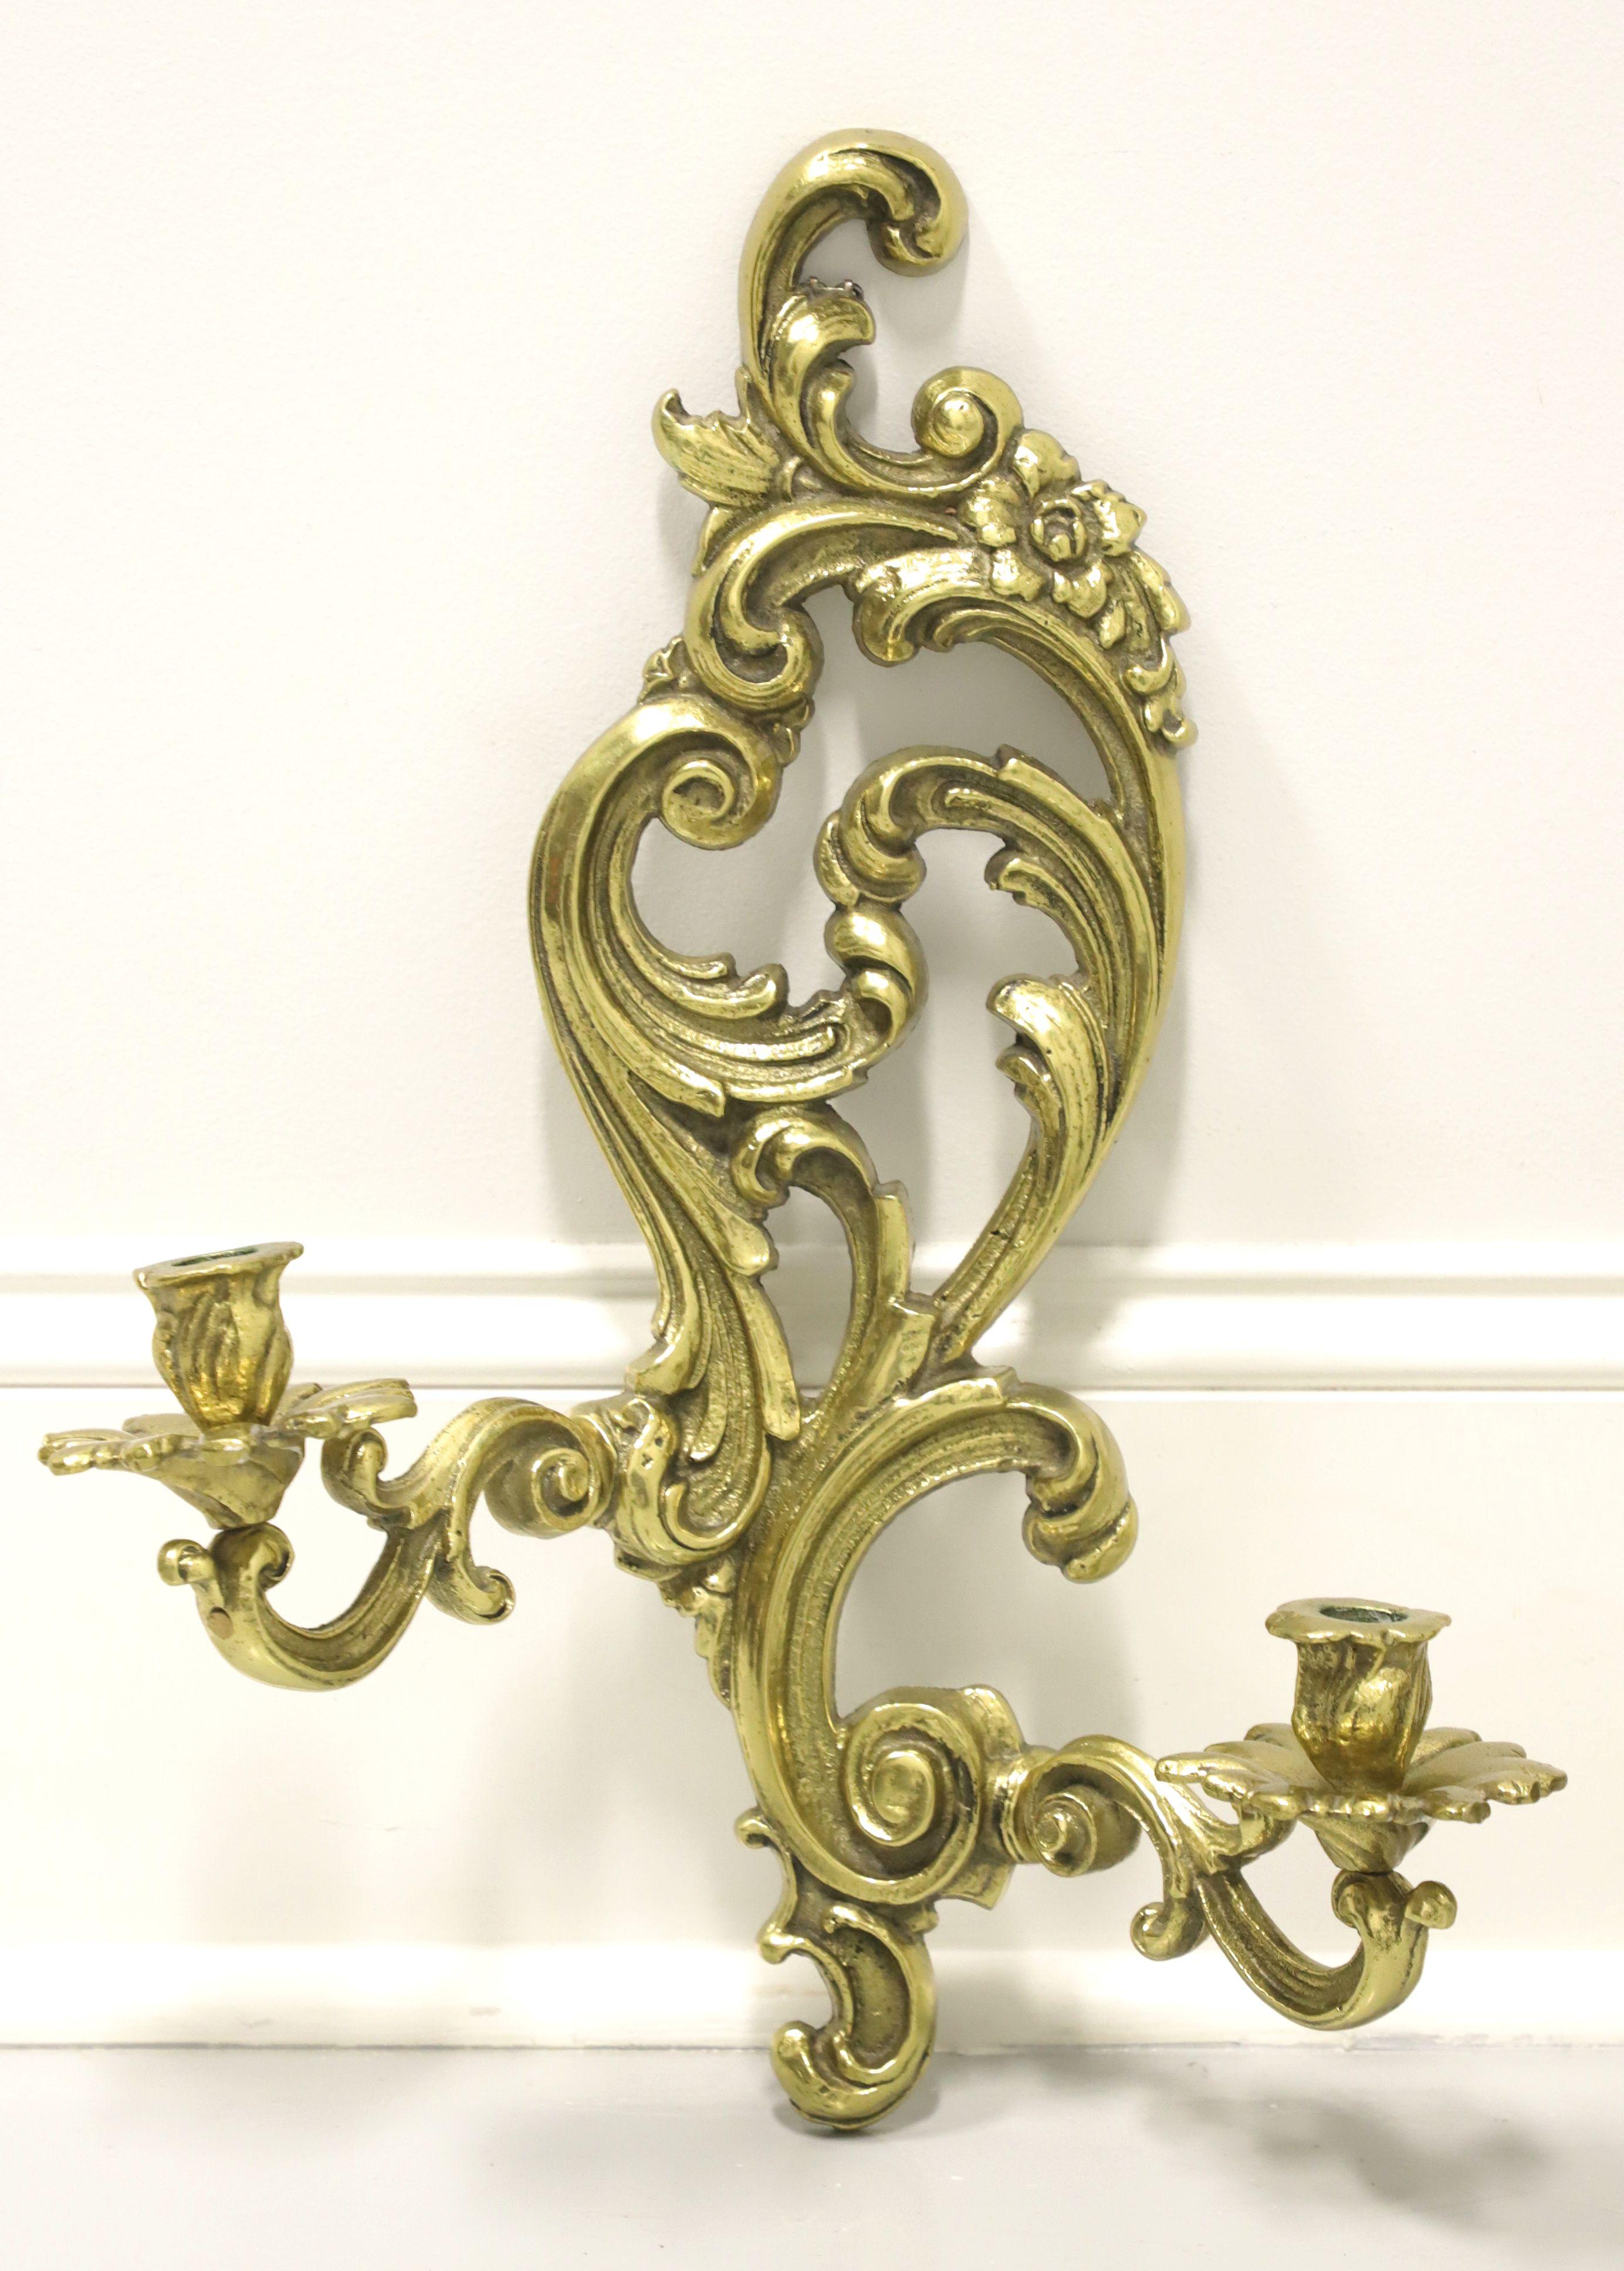 A pair of antique Rococo style candle wall sconces, unbranded. Solid brass decoratively sculpted in a swirl & botanical form, with two arms and candleholders. Possibly made in the USA, circa 1920's.

Measures: 13.5 W 5.5 D 17.5 H, Weighs